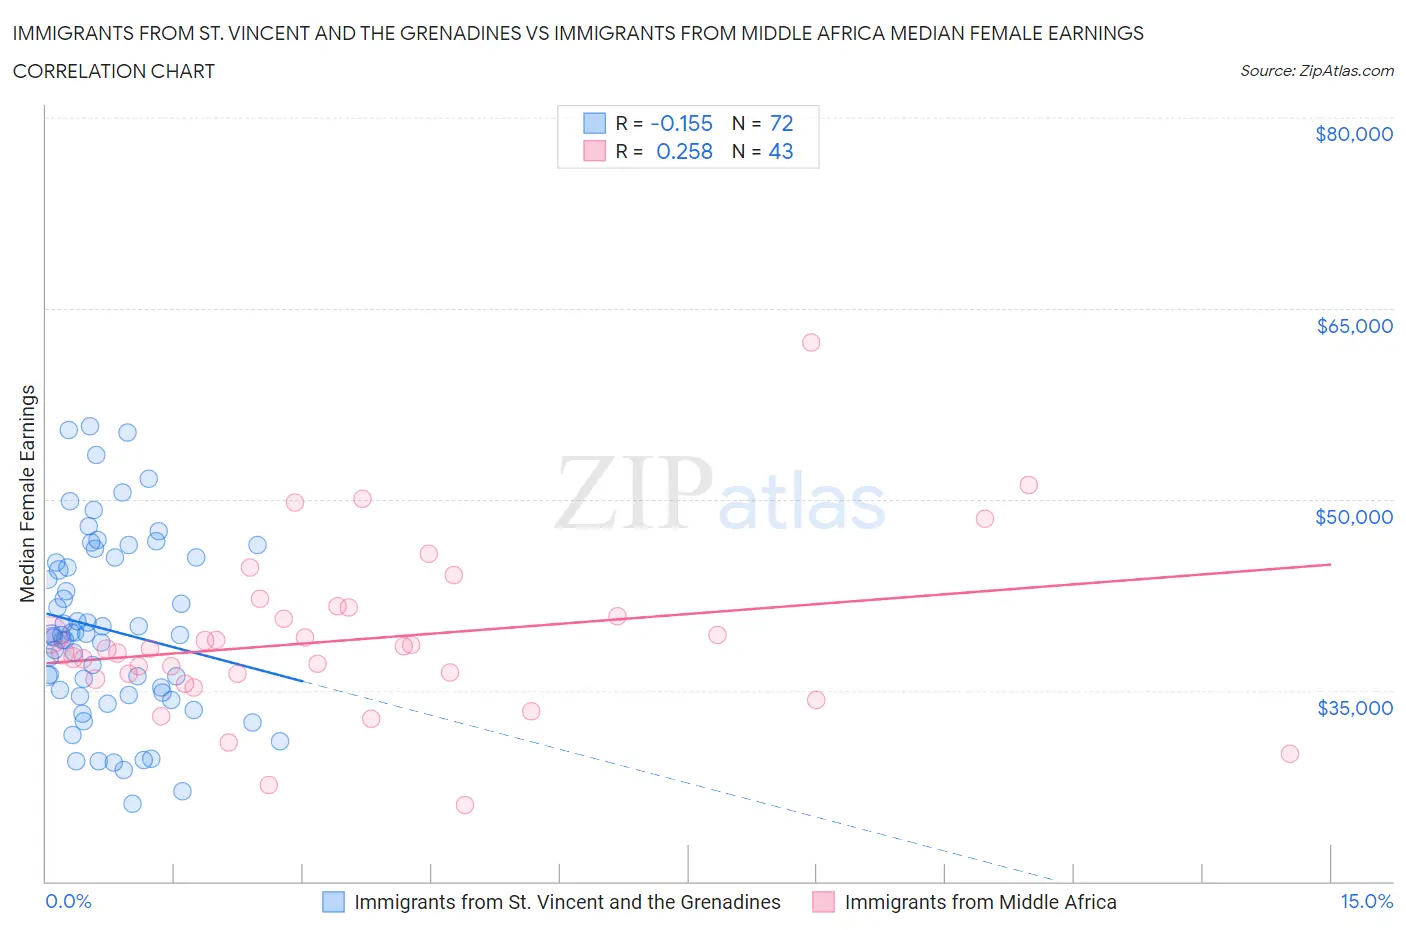 Immigrants from St. Vincent and the Grenadines vs Immigrants from Middle Africa Median Female Earnings